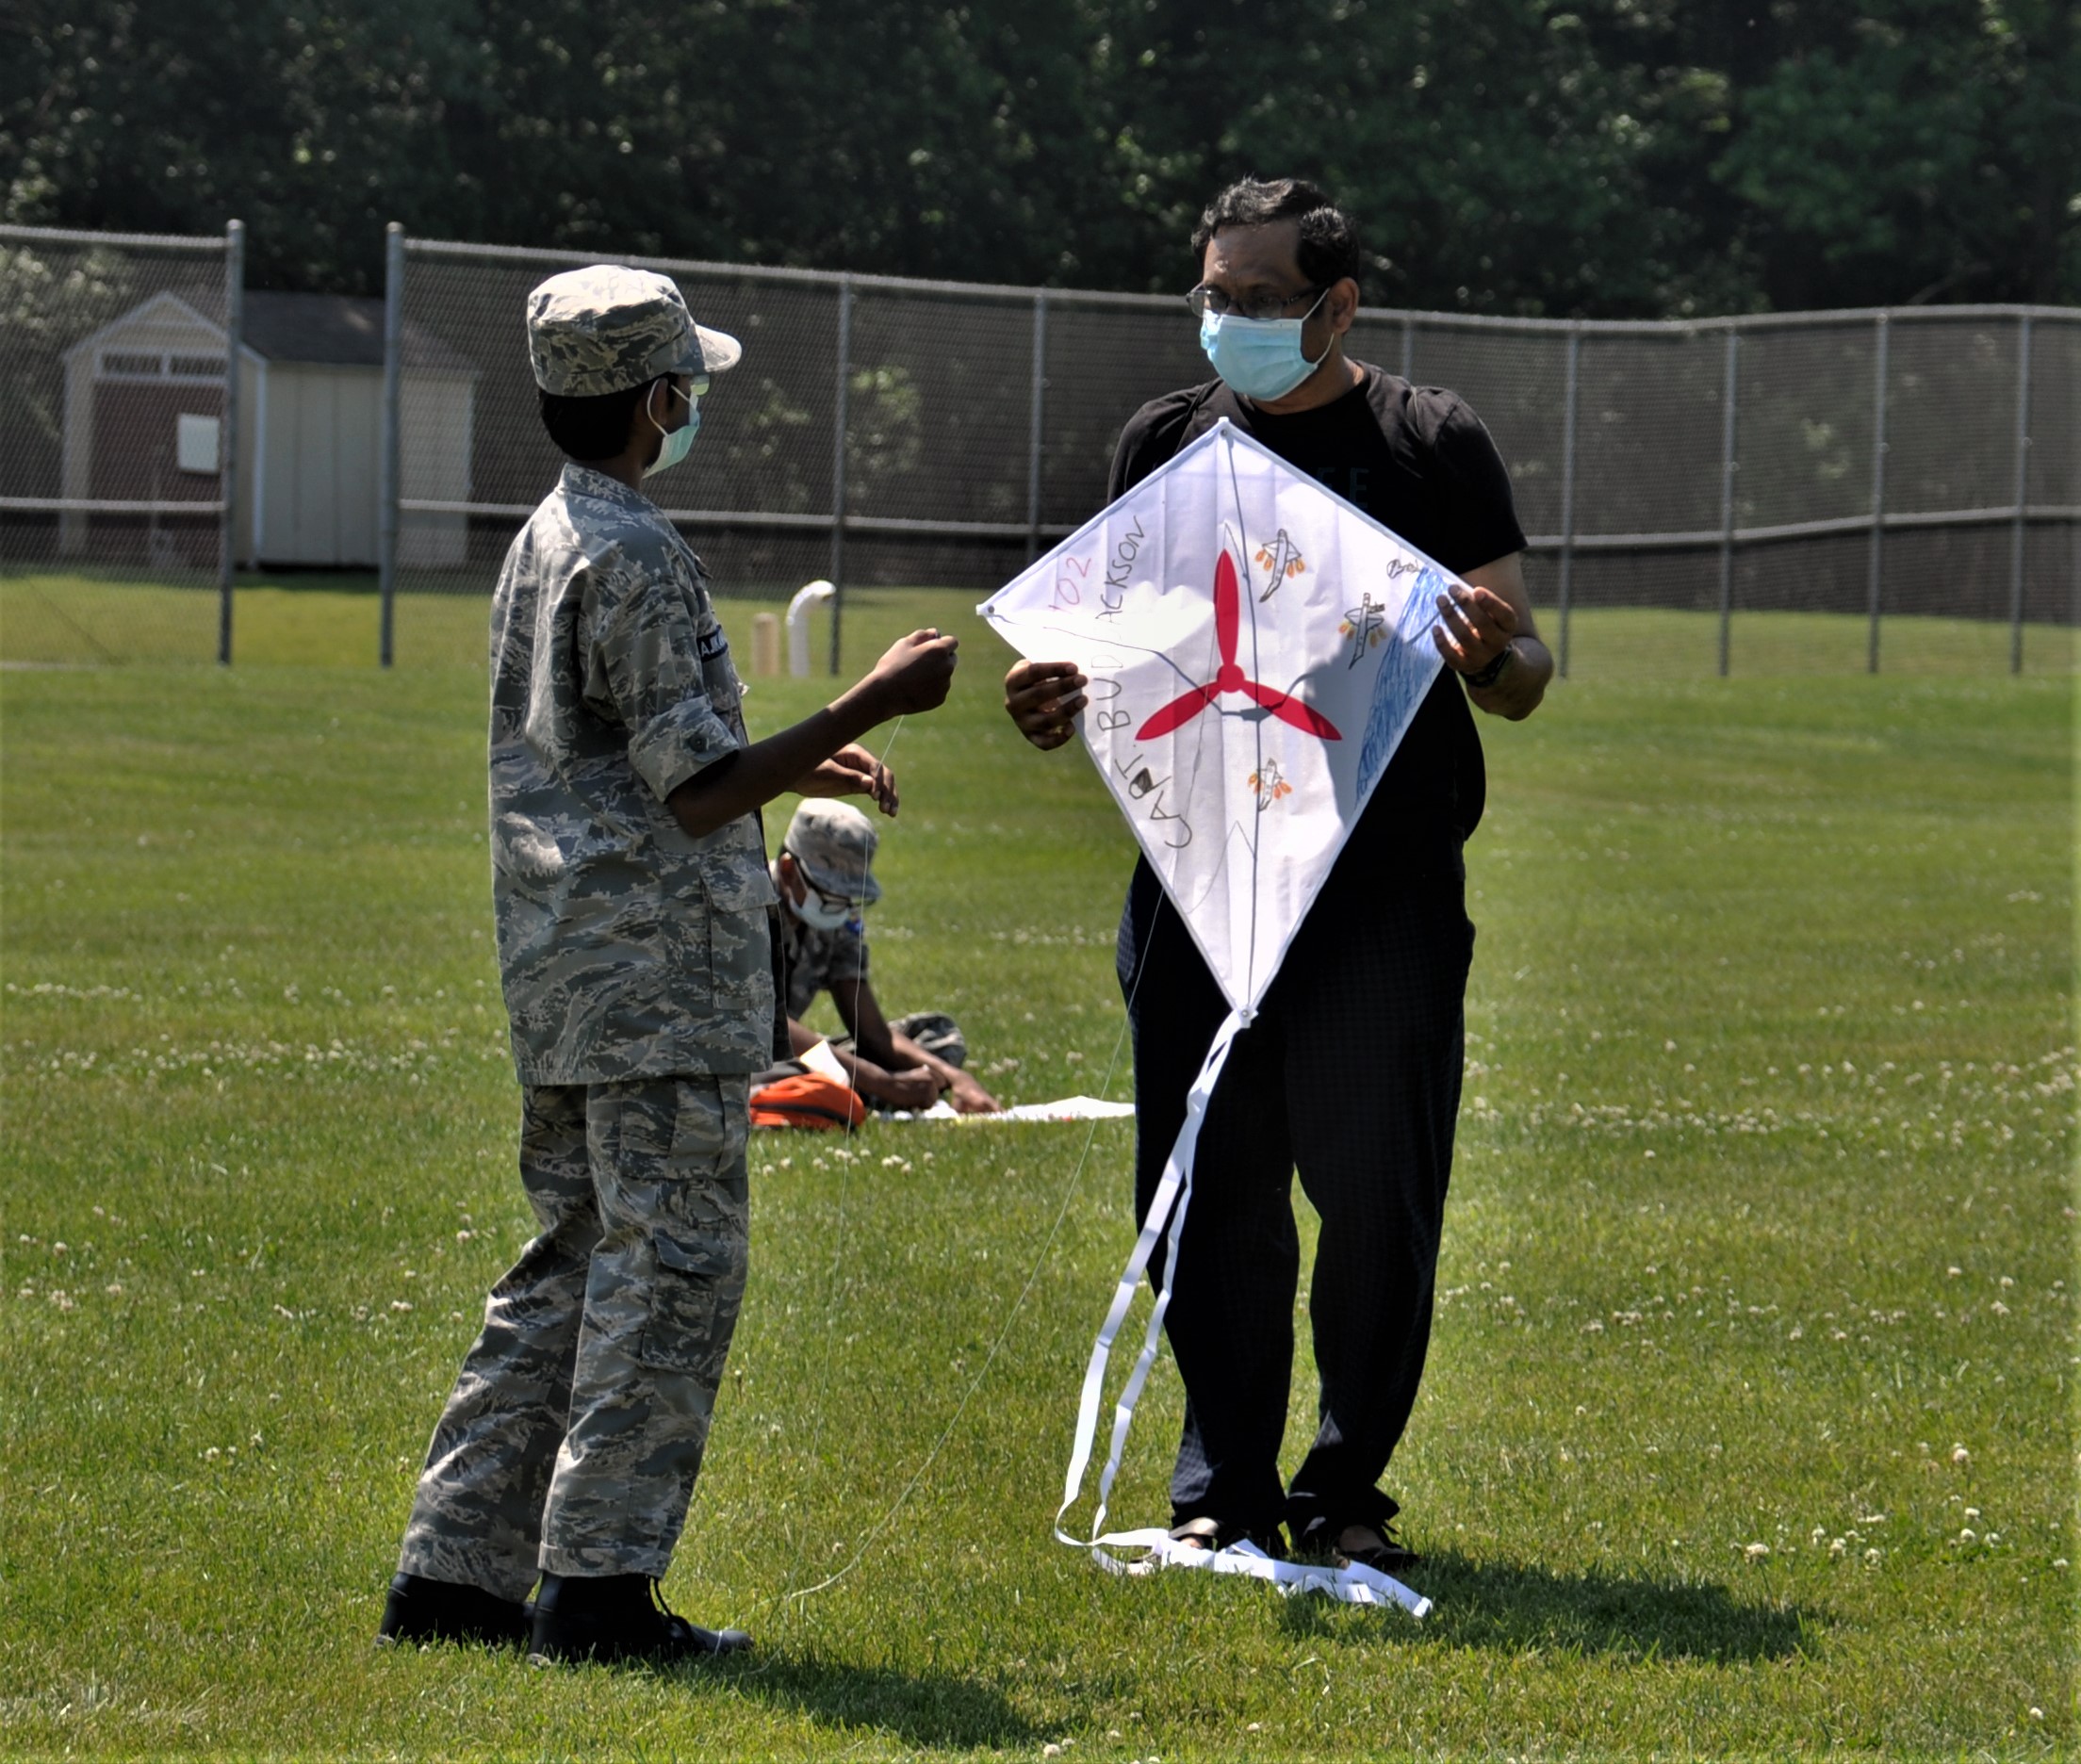 Cadet and leader prepare to fly a kite